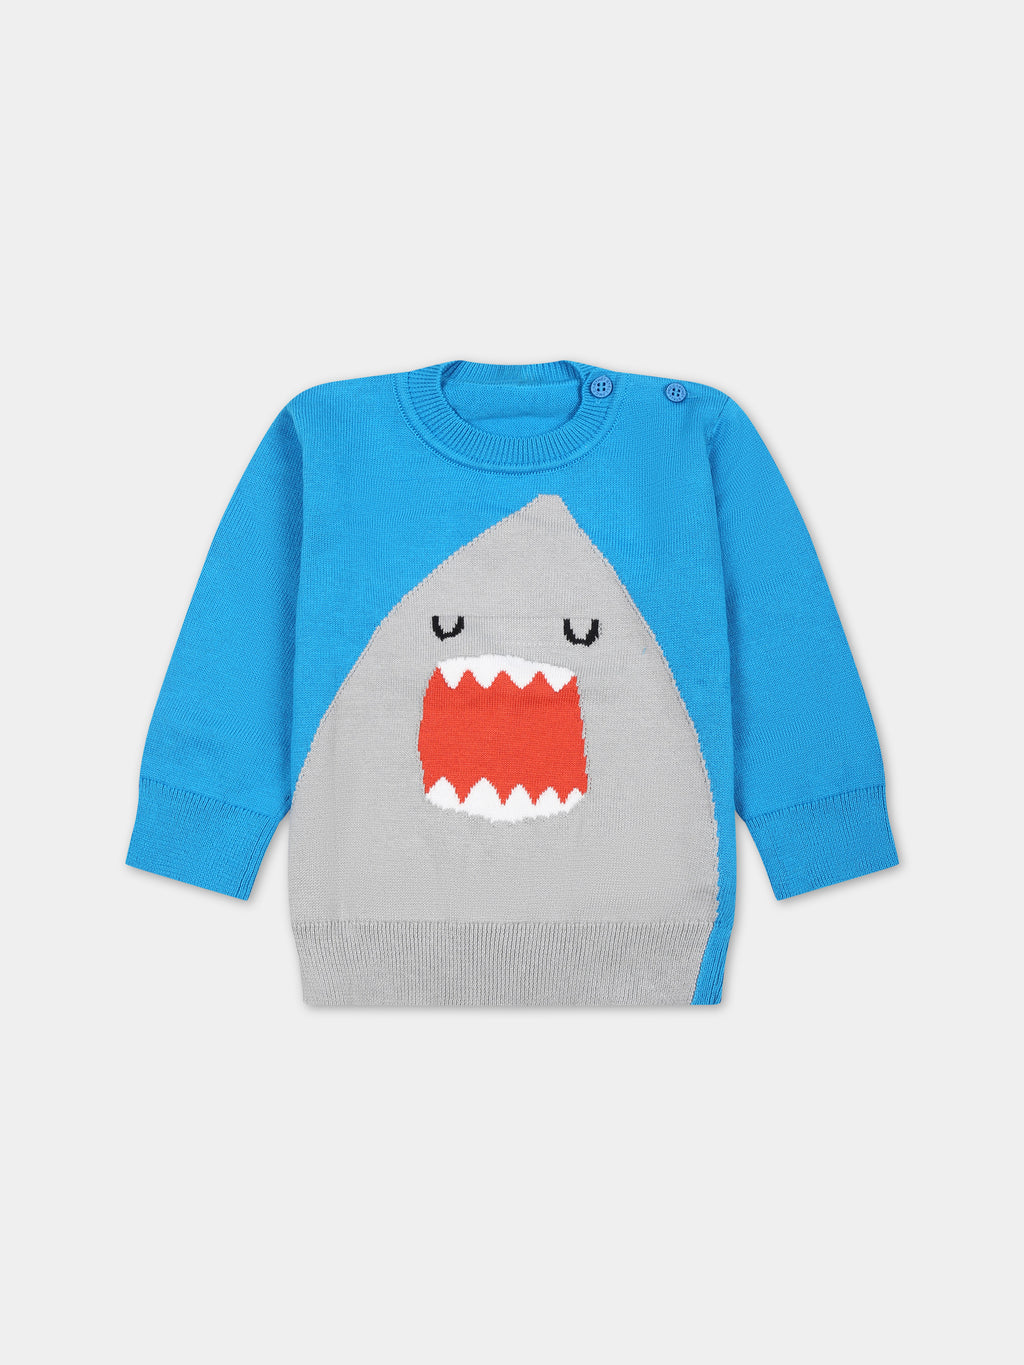 Light blue sweater for baby boy with shark